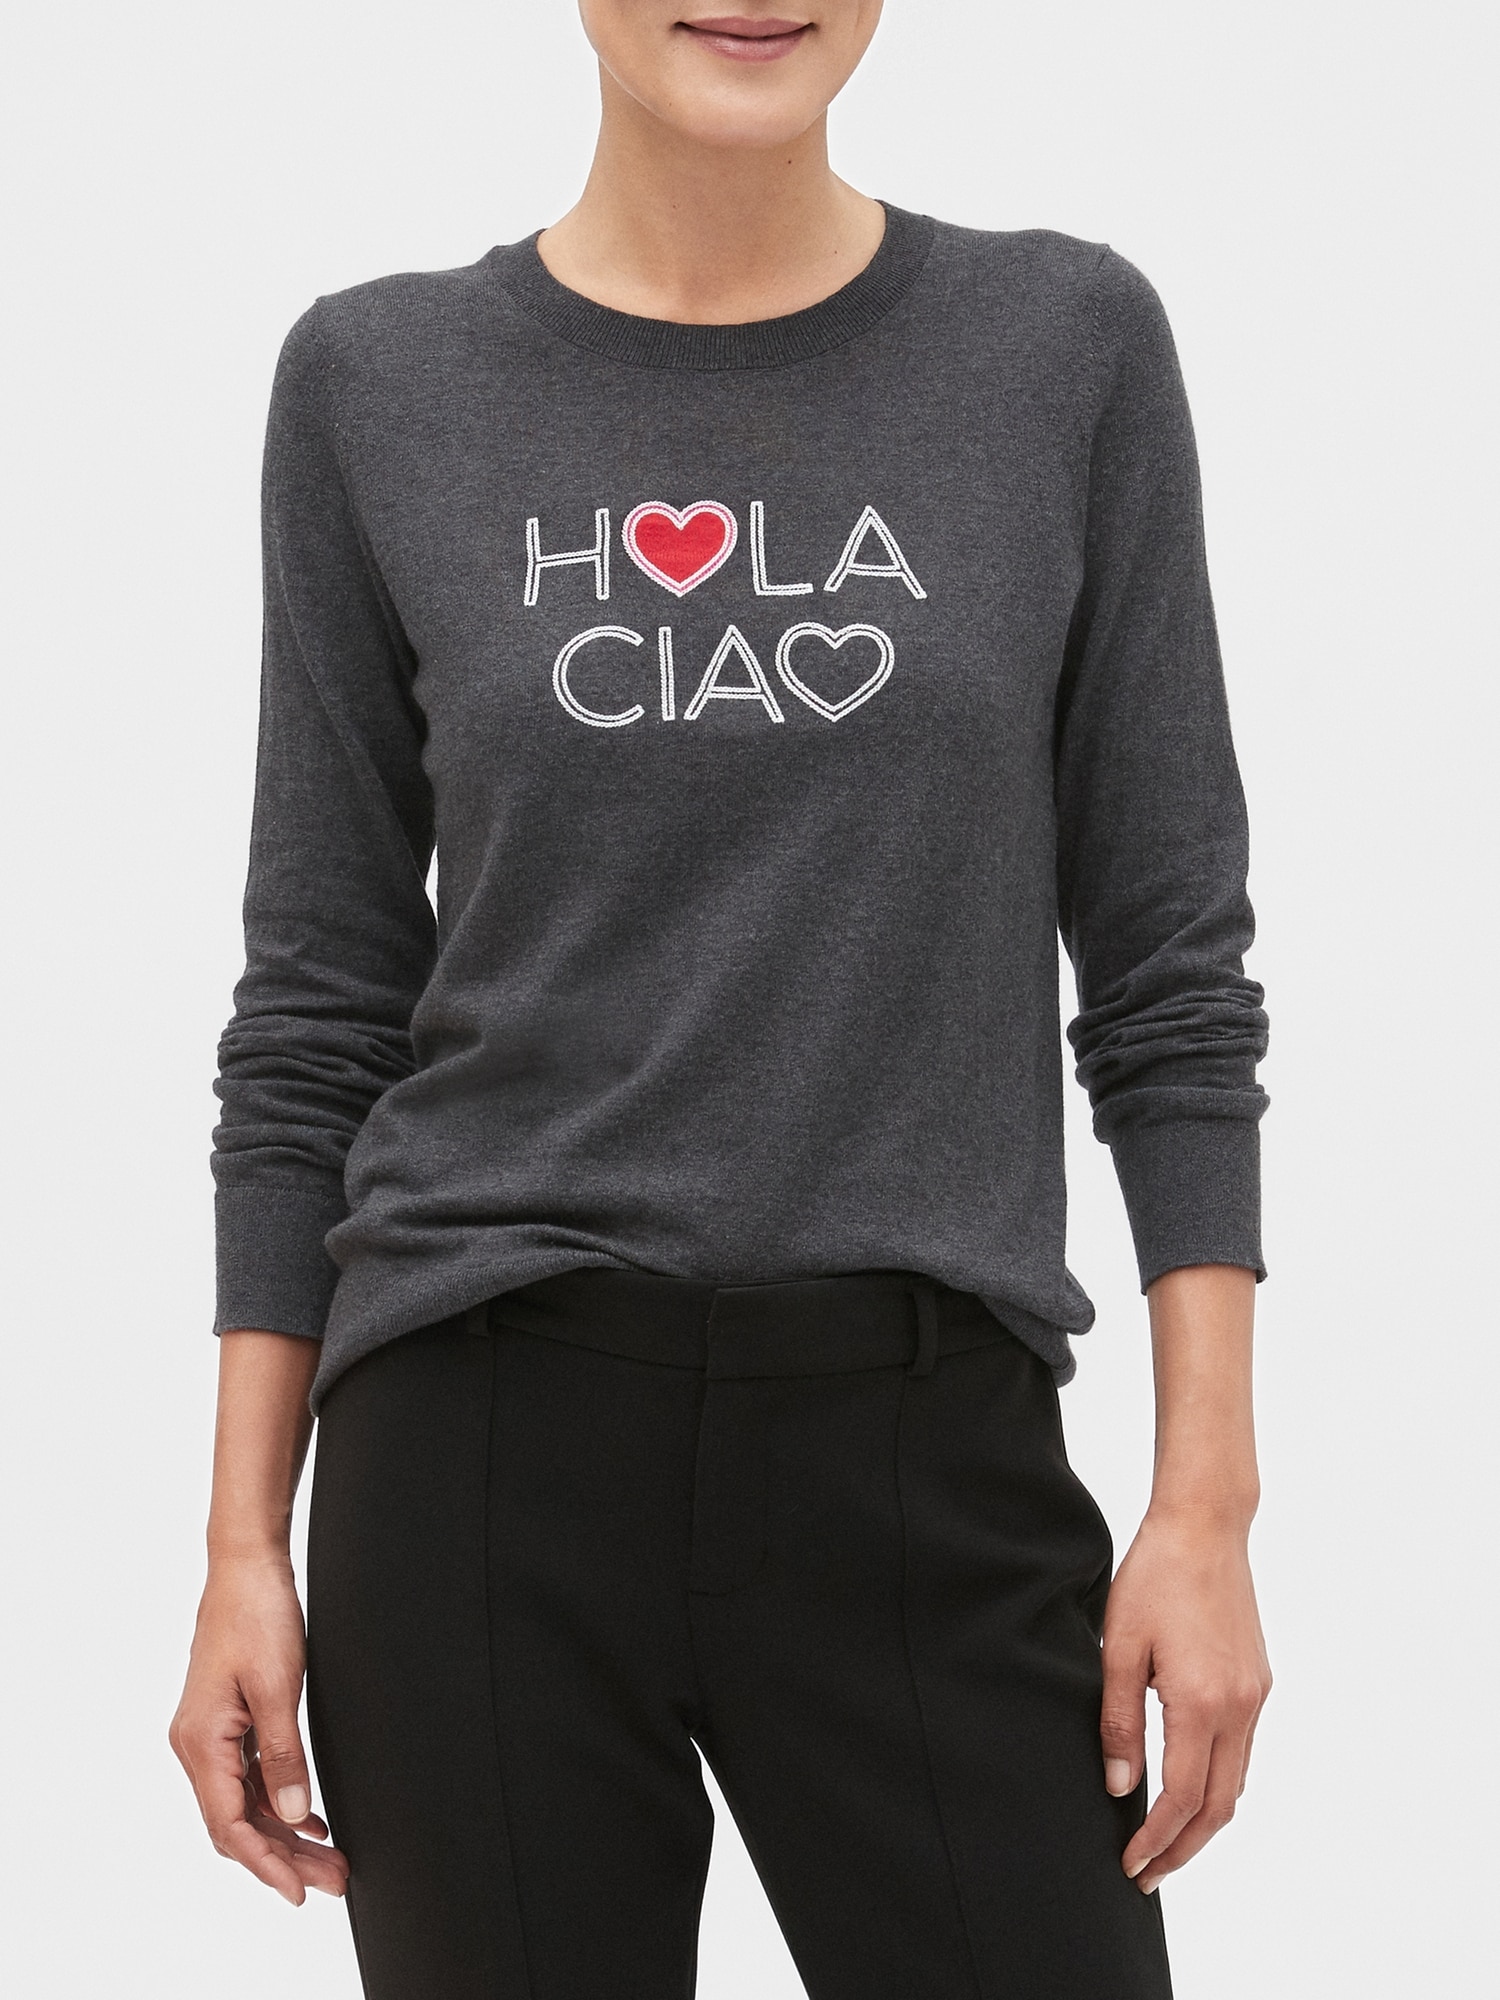 Washable Forever Hola Ciao Crew-Neck Sweater